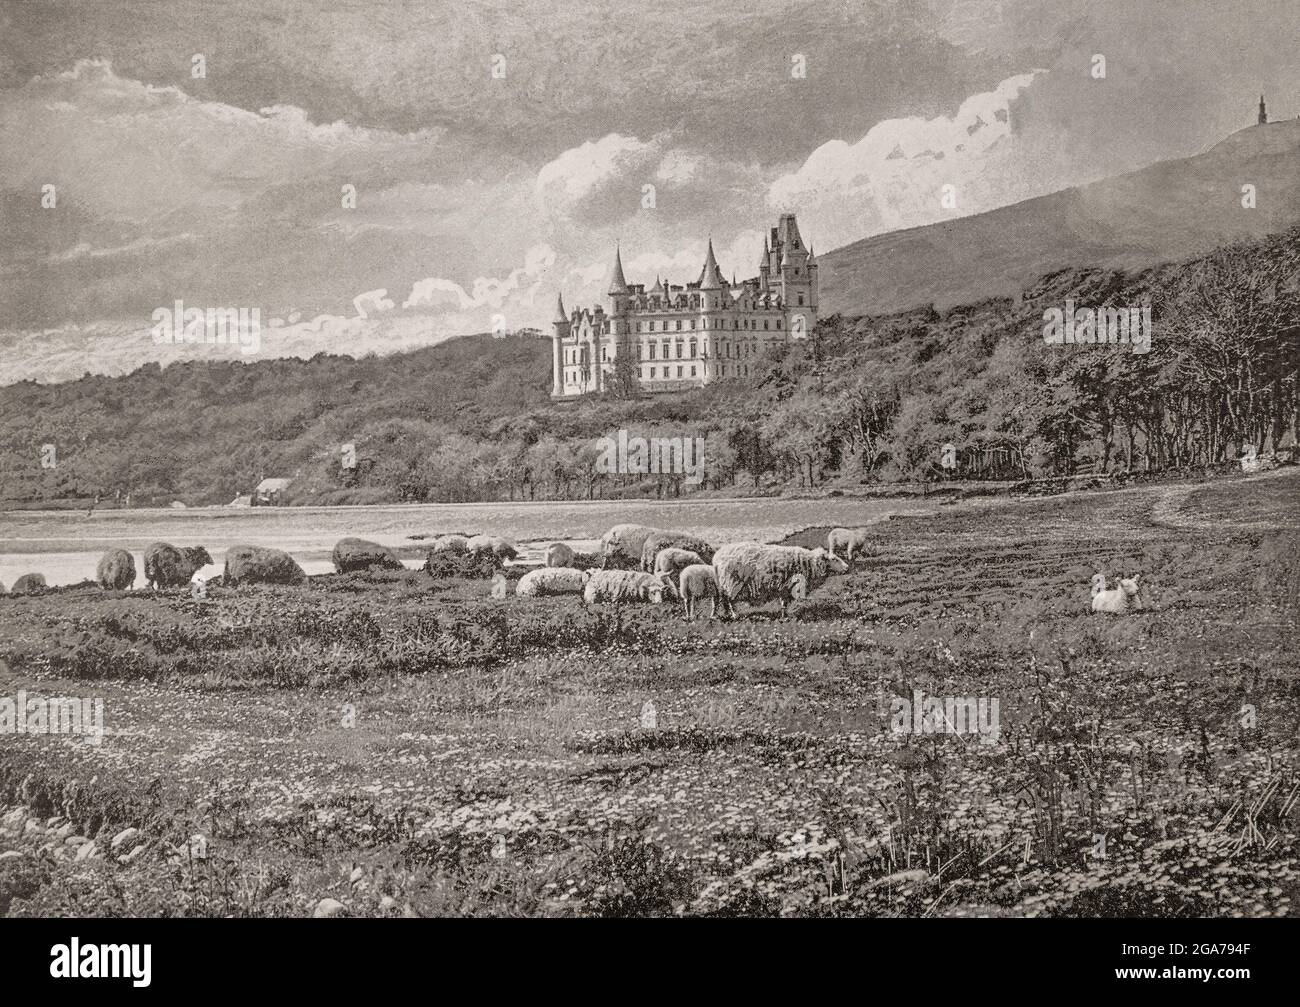 A late 19th century view of Dunrobin Castle, a stately home in Sutherland, in the Highland area of Scotland. The family seat of the Earl of Sutherland and the Clan Sutherland, it's origins lie in the Middle Ages and some of the original building is visible in the interior courtyard. Between 1835 and 1850, Sir Charles Barry remodelled the castle in the Scottish Baronial style for the 2nd Duke of Sutherland. Stock Photo